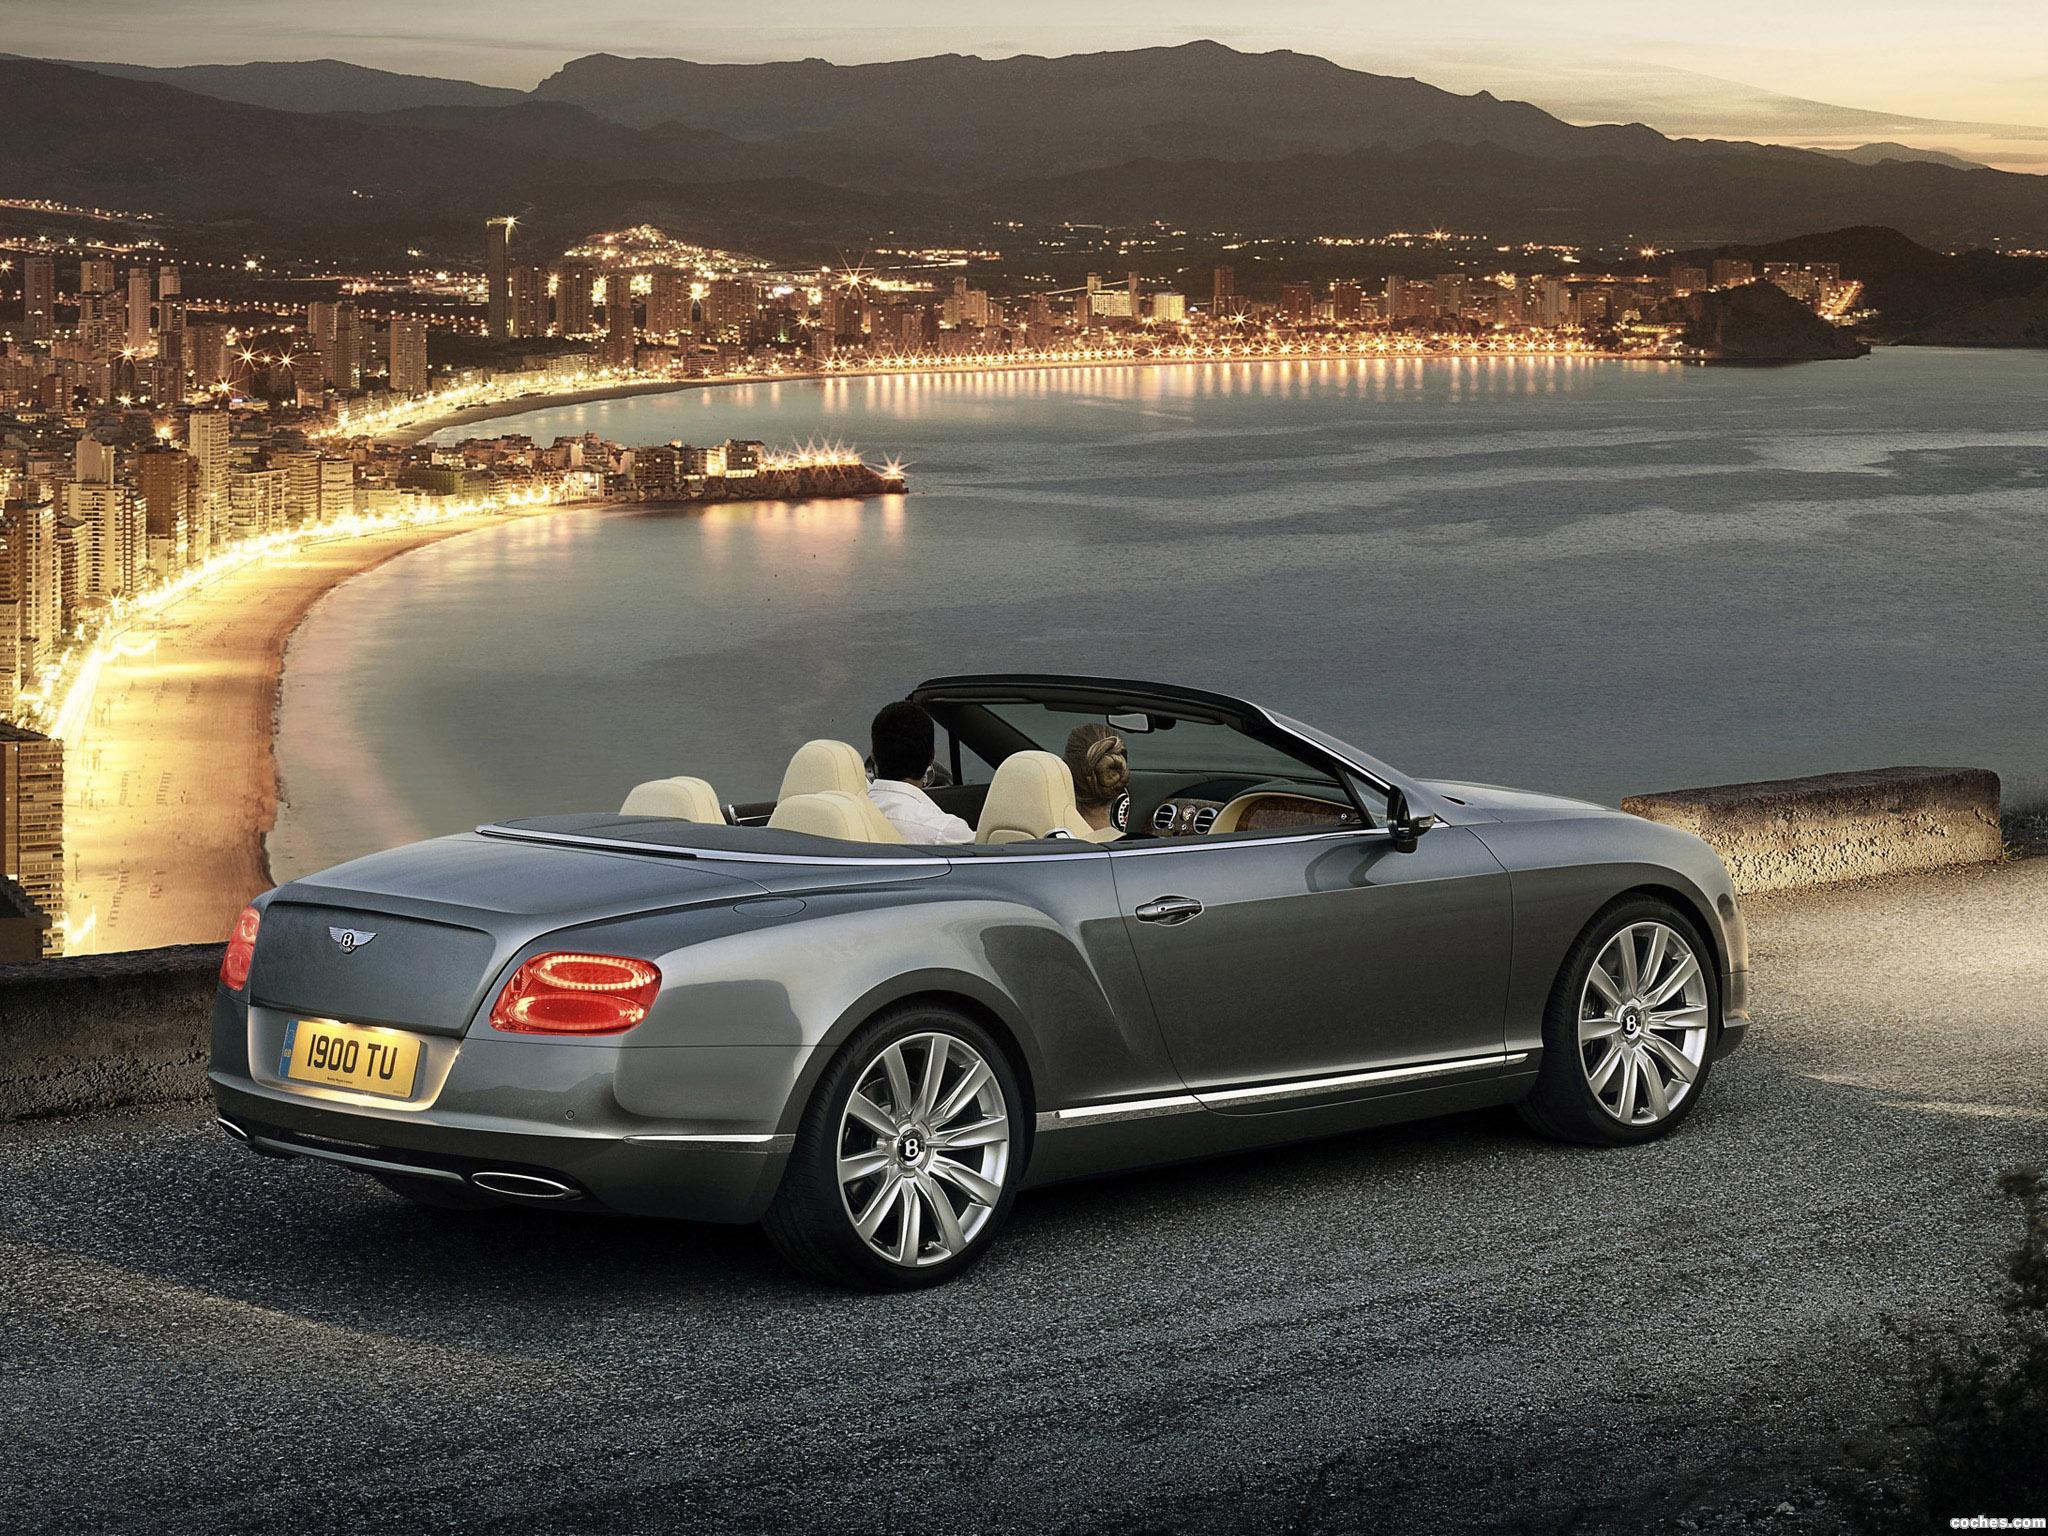 Unparalleled Luxury: The 2011 Bentley Contine
ntal GT